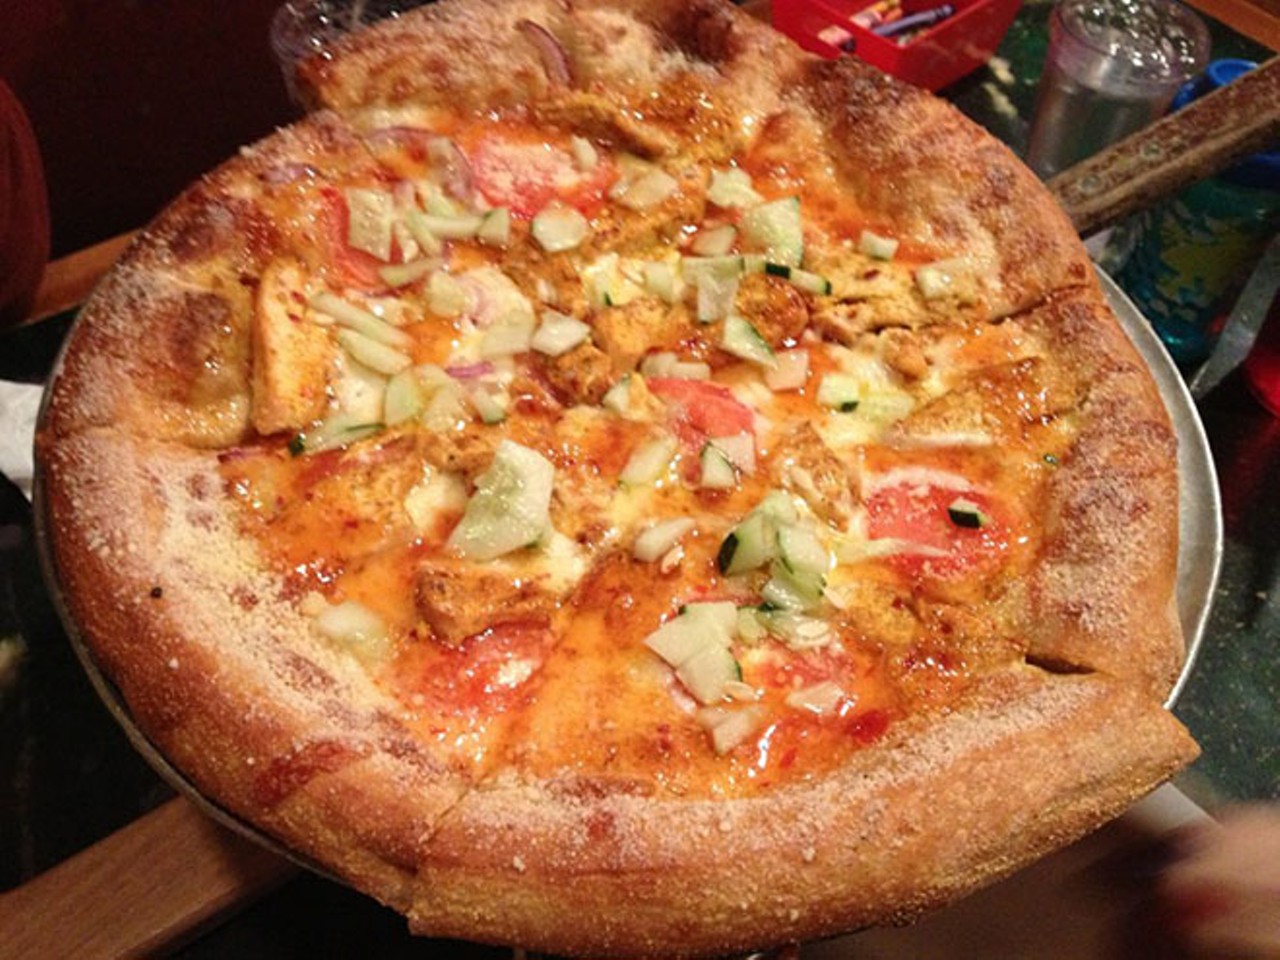 Thai Dye pizza at Mellow Mushroom
2015 Aloma Ave., Winter Park, 407-657- 7755; 11680 E. Colonial Drive, 407-384-4455, mellowmushroom.com
Swap out the mozzarella for Daiya and the chicken for curry tofu. Mmm, psychedelic hippie deliciousness.
Photo via Yelp user Melly M.